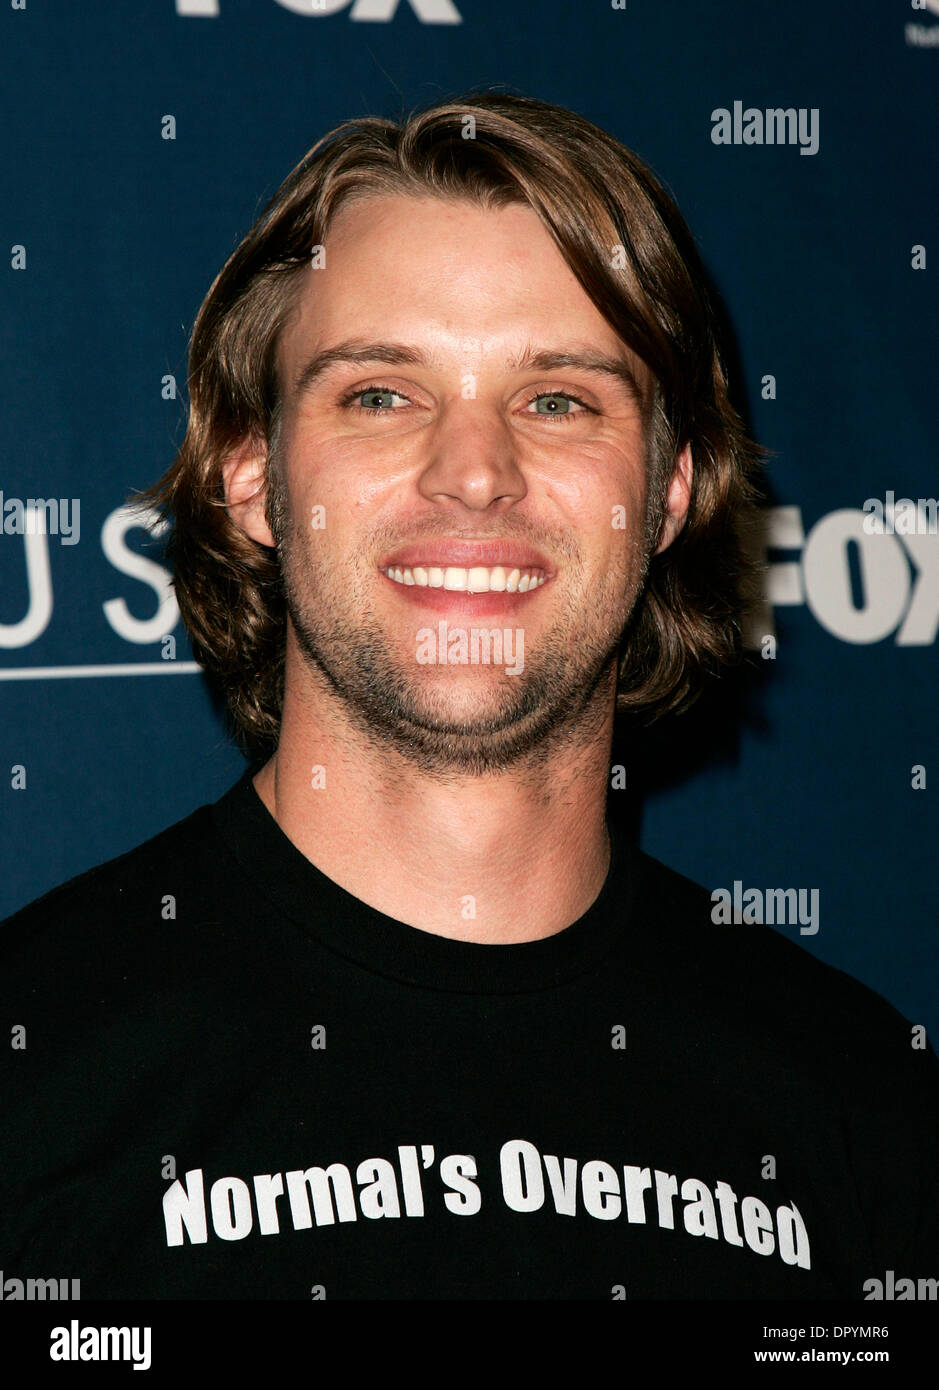 Jan 21, 2009 - West Hollywood, California, USA - Actor JESSE SPENCER arriving to the House' 100th Episode Party held at the STK. (Credit Image: © Lisa O'Connor/ZUMA Press) Stock Photo